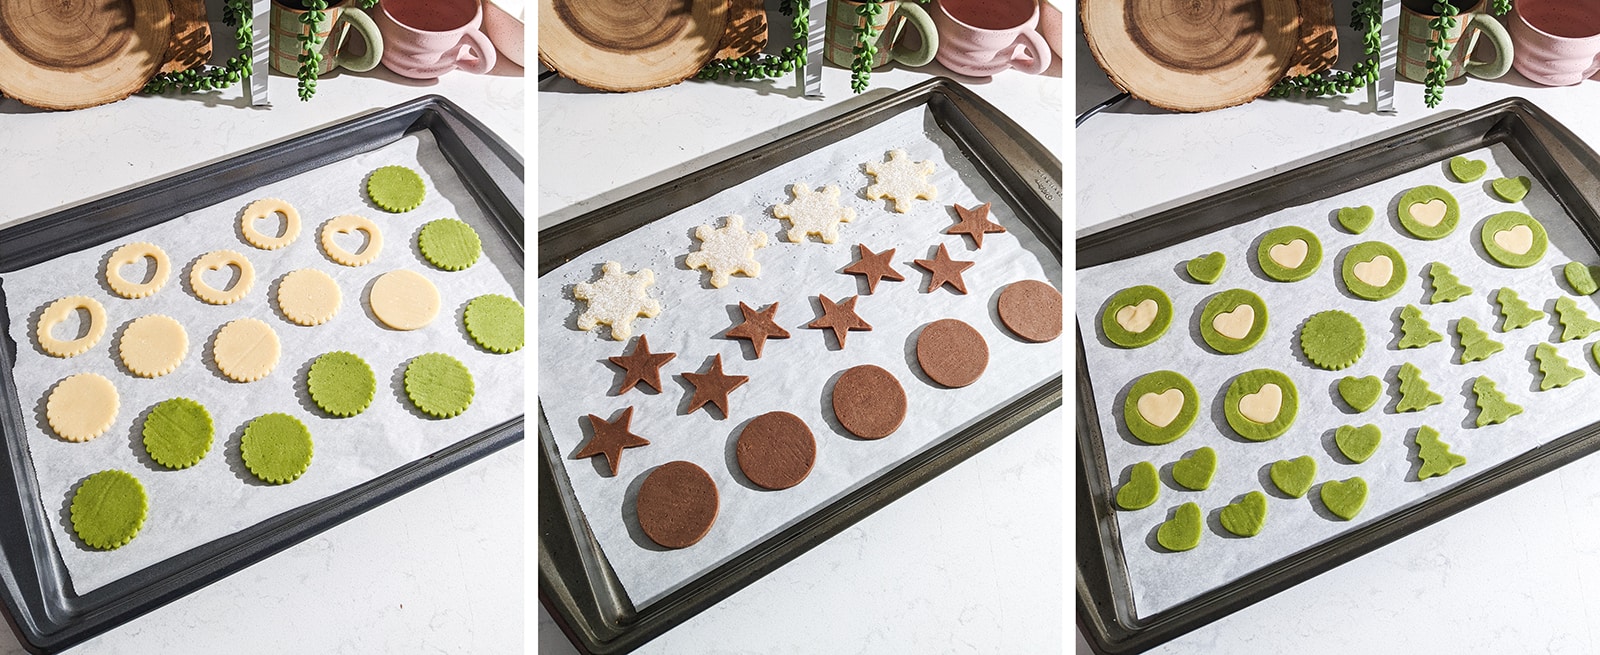 Cookie dough cutouts on baking trays before being baked.